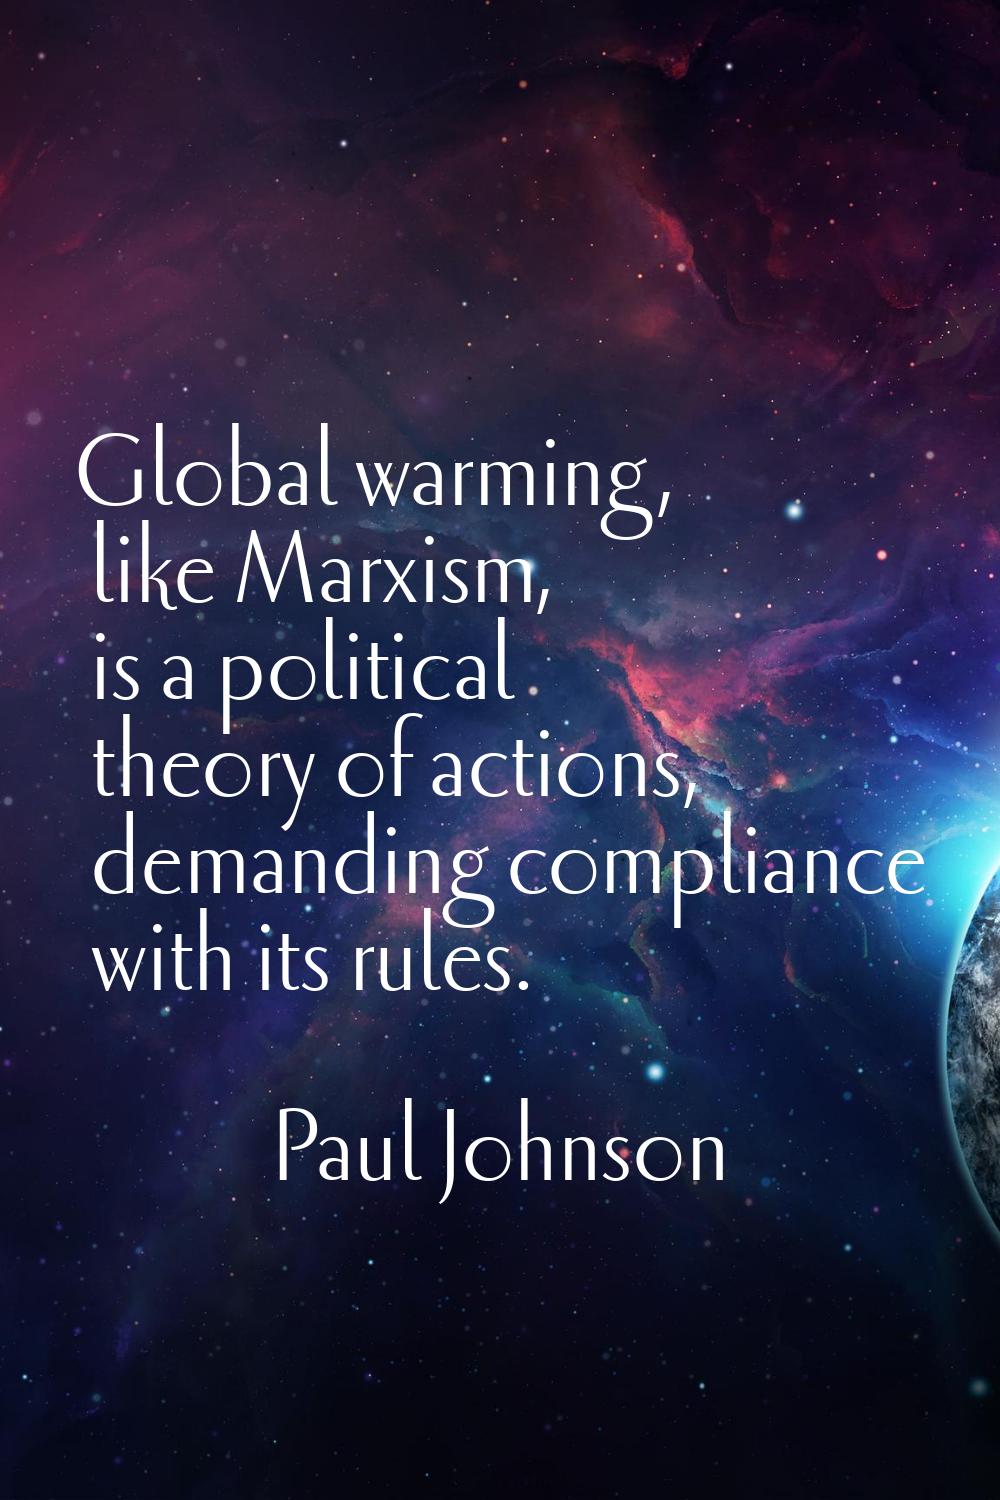 Global warming, like Marxism, is a political theory of actions, demanding compliance with its rules